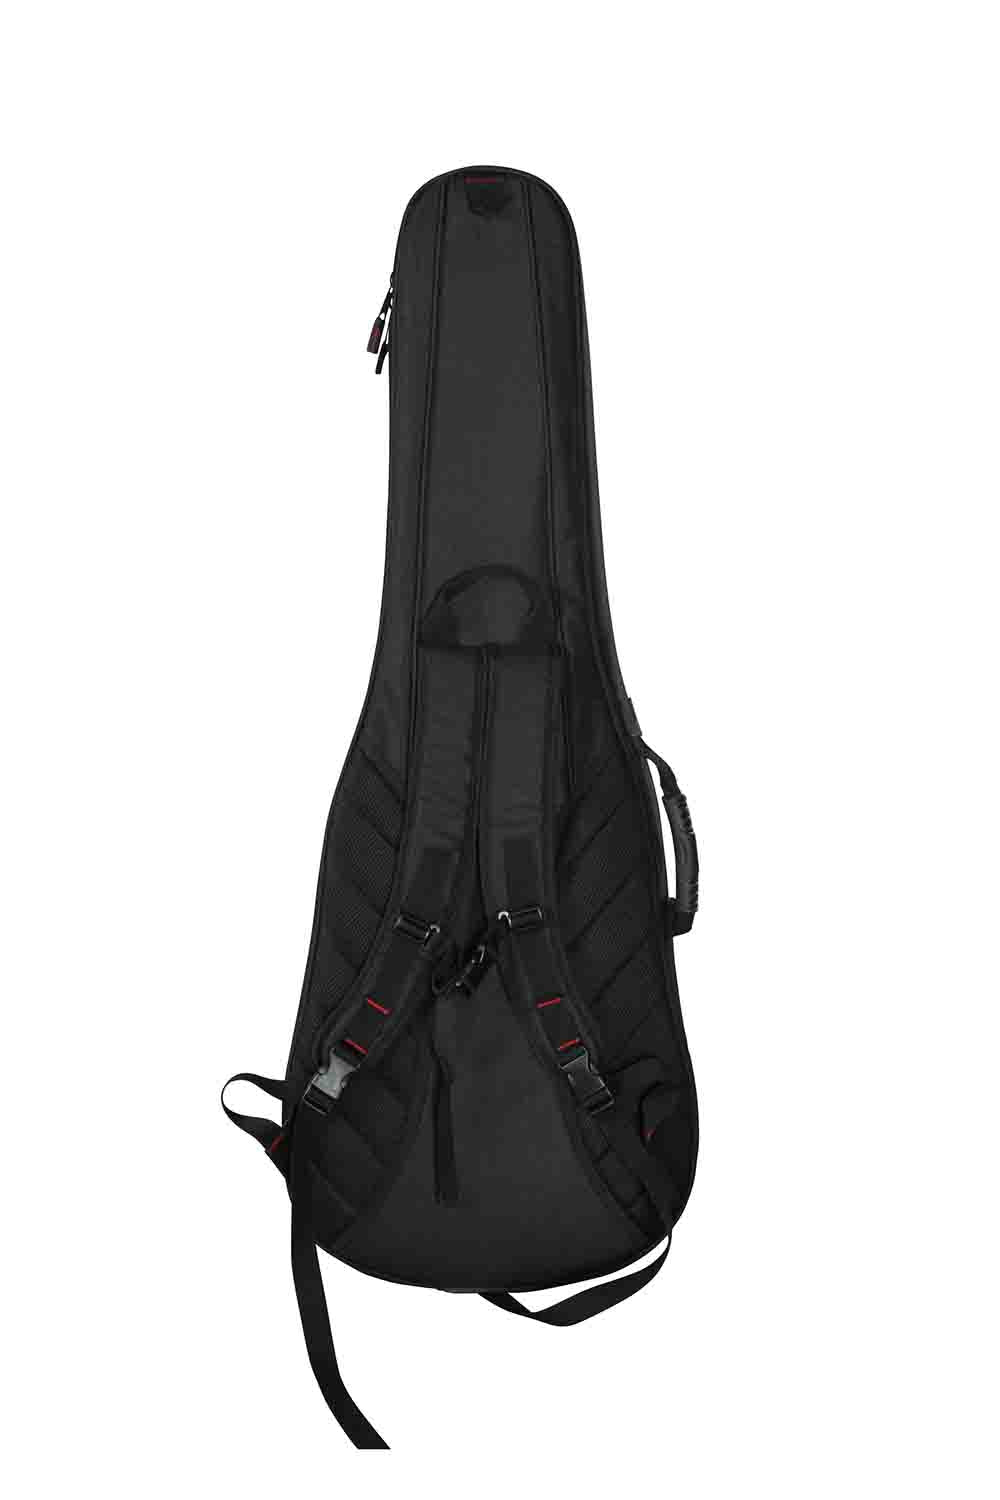 Gator Cases GB-4G-ELECTRIC 4G Style Gig Bag for Electric Guitars with Adjustable Backpack Straps - Hollywood DJ